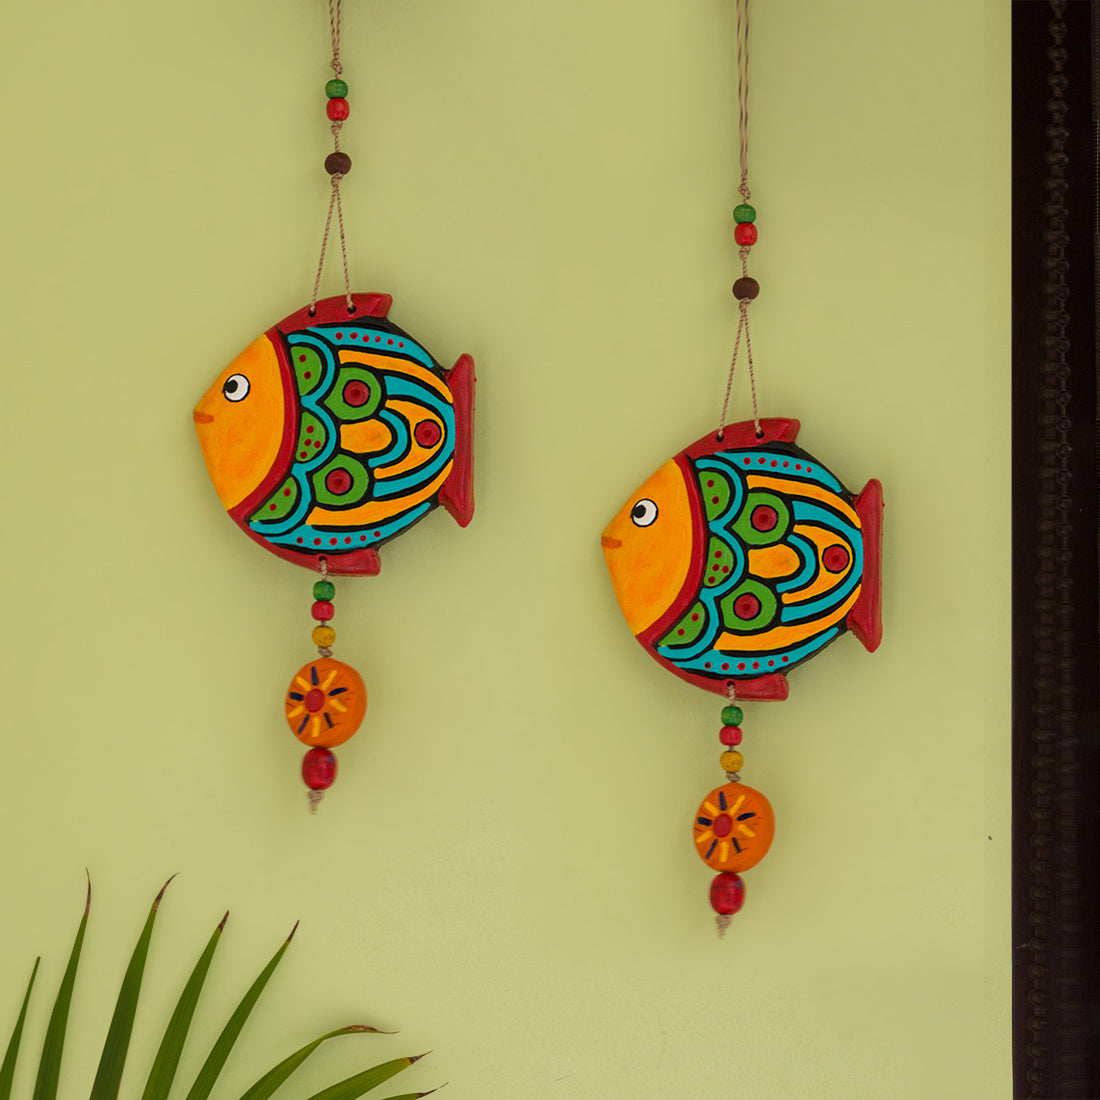 The Fish Duo' Handmade & Hand-painted Decorative Wall Hanging In  Terracotta (Set of 2)